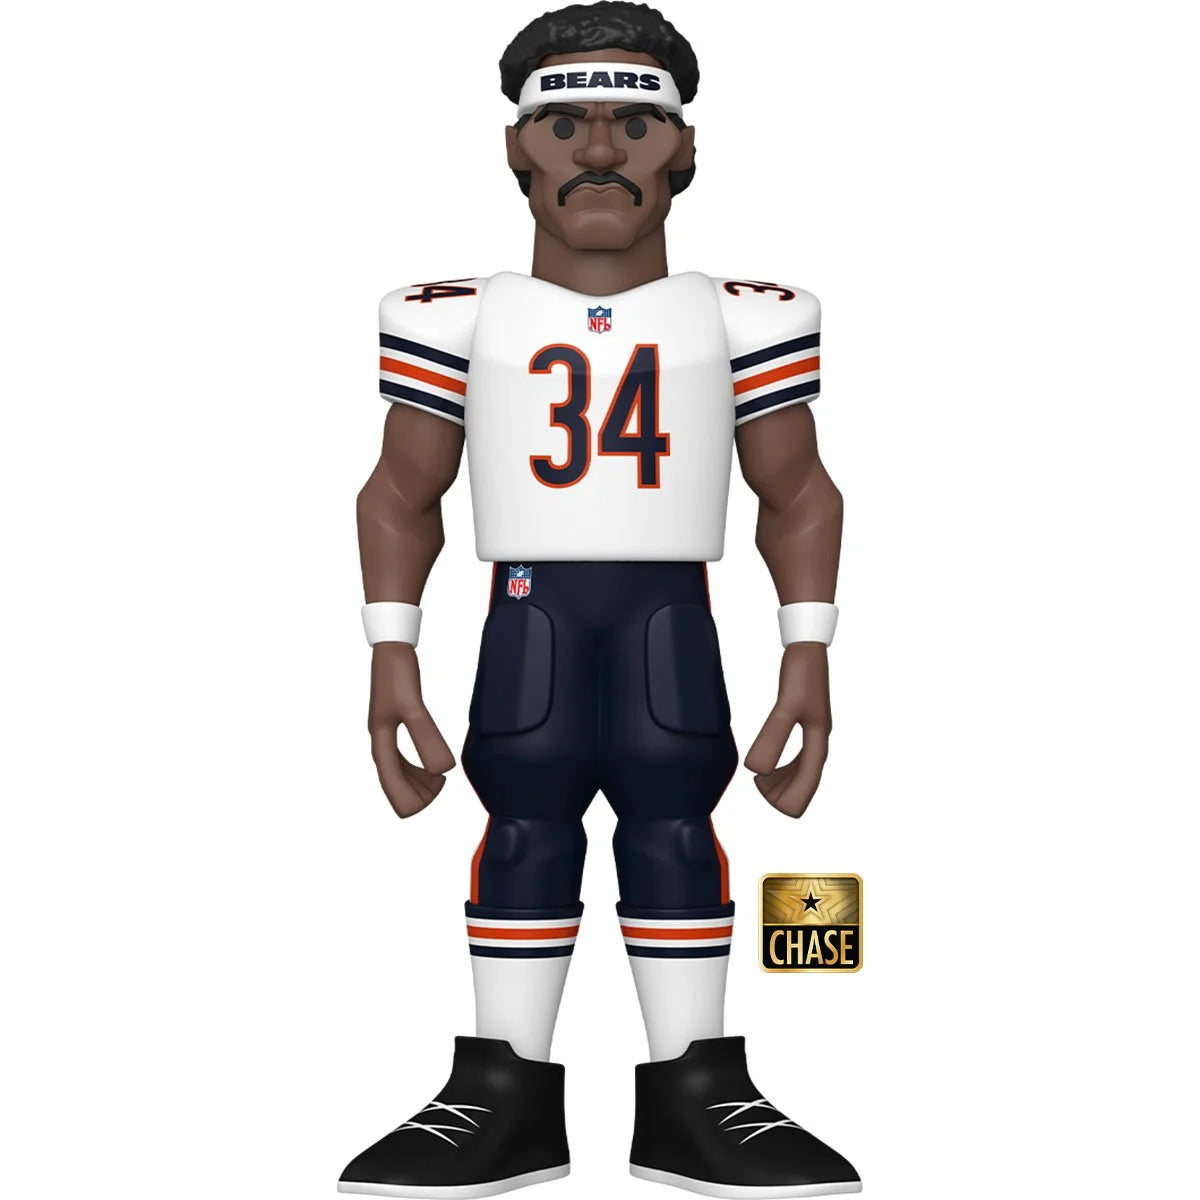 Walter Payton Bears NFL Legends 12-Inch Funko Vinyl Gold Figure w/ Chance of chase!